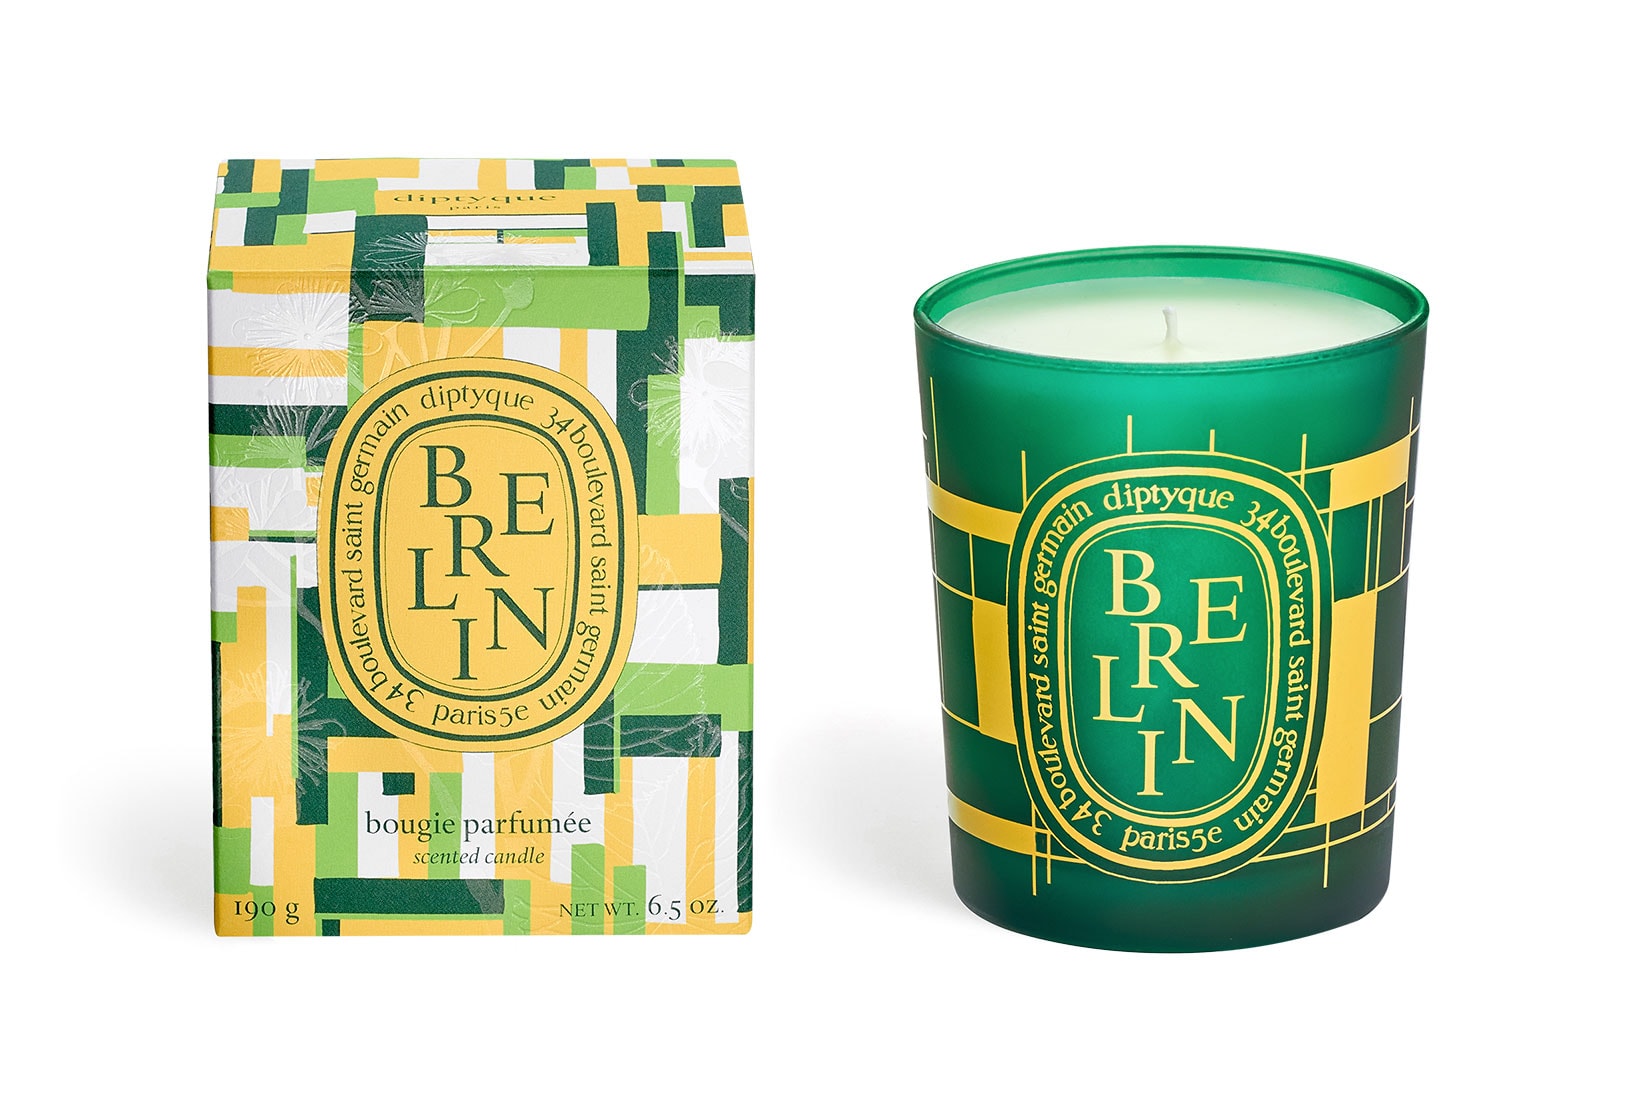 diptyque city candles collection full global release home scents berlin germany